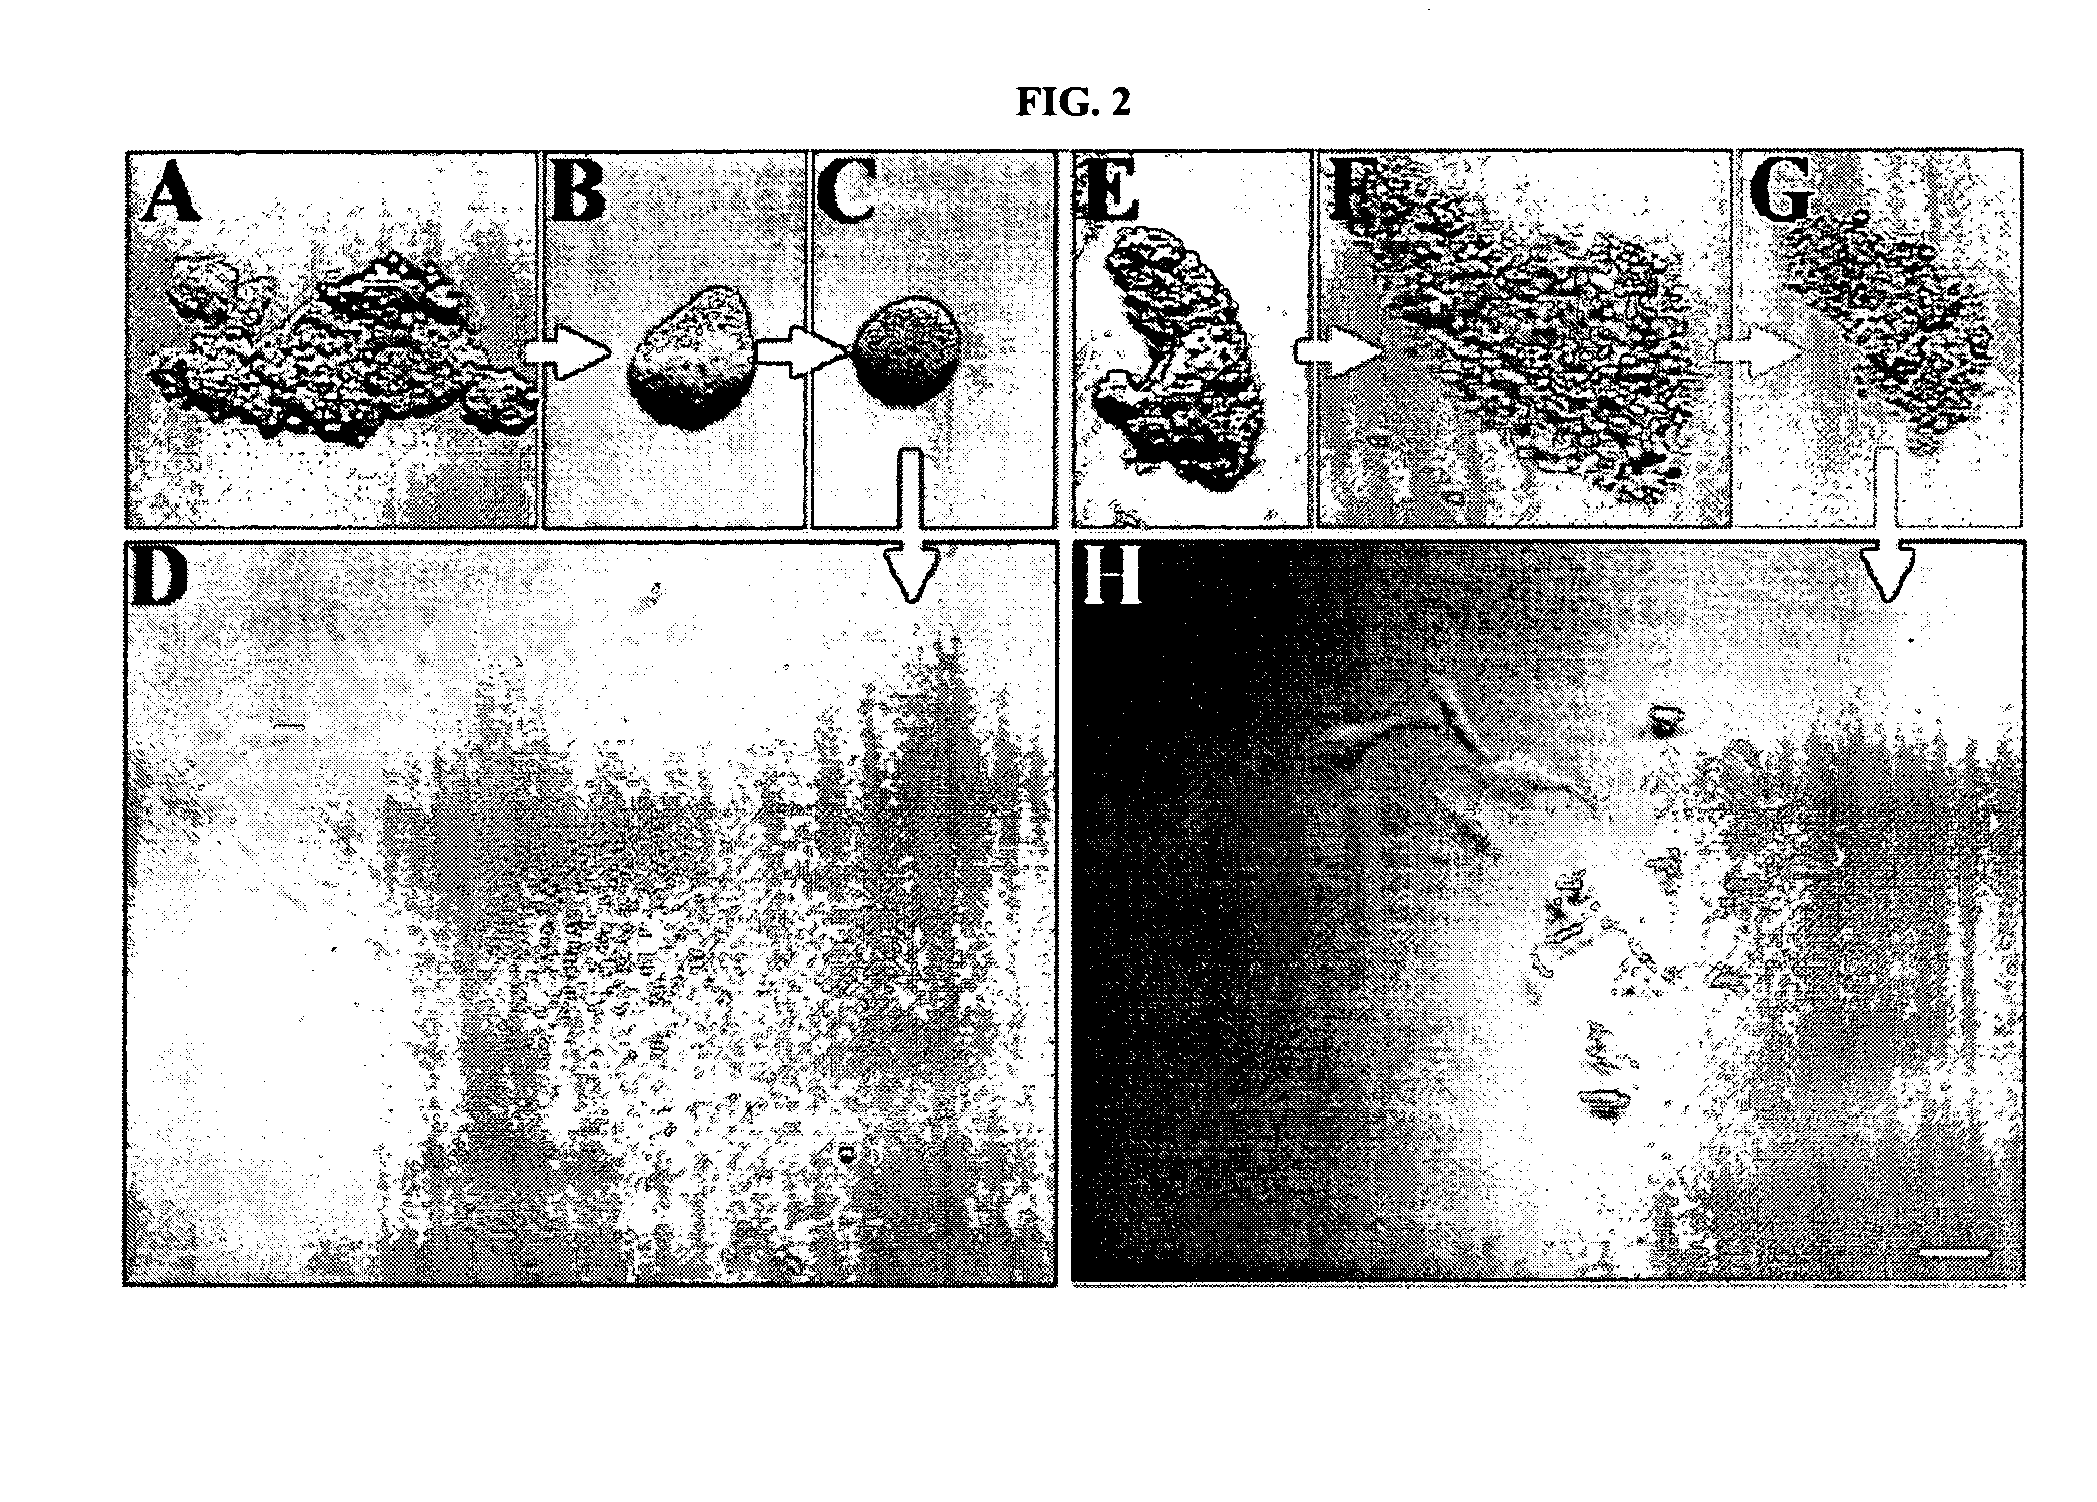 RNAi Methods and Compositions for Stimulating Proliferation of Cells with Adherent Functions